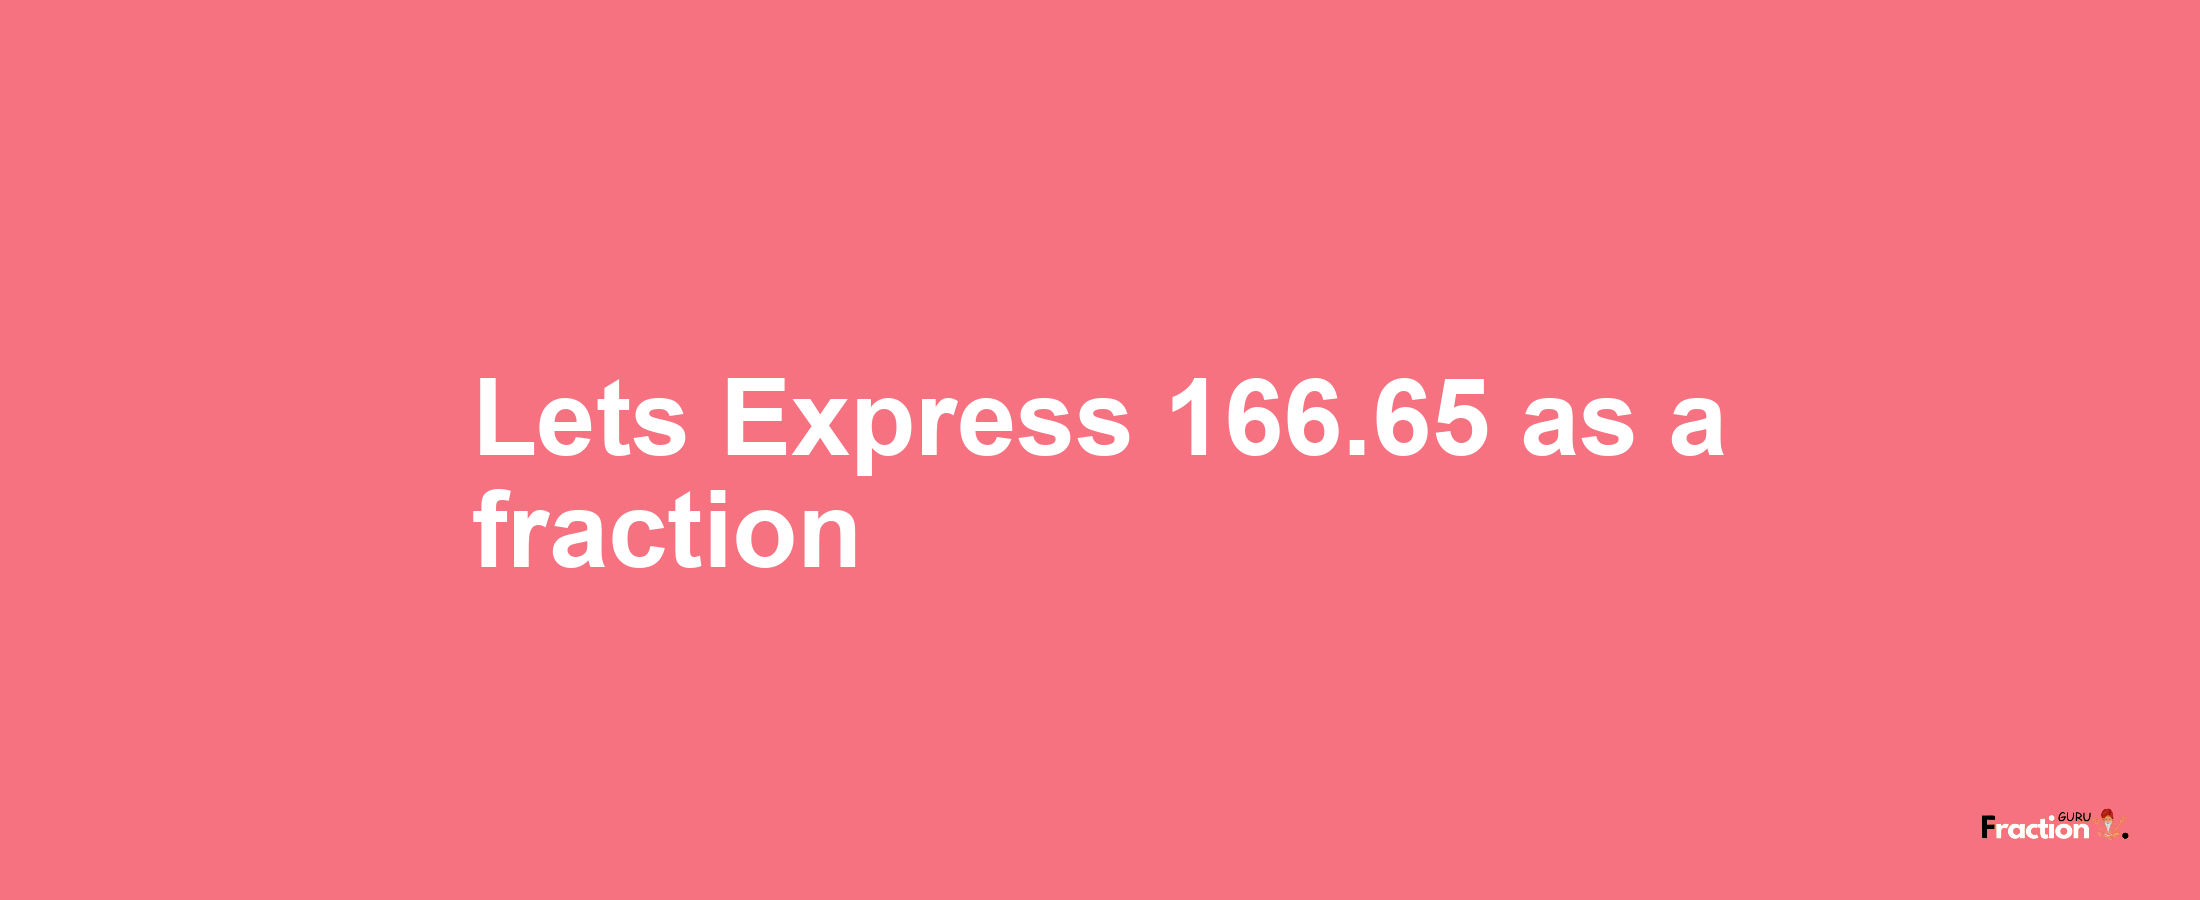 Lets Express 166.65 as afraction